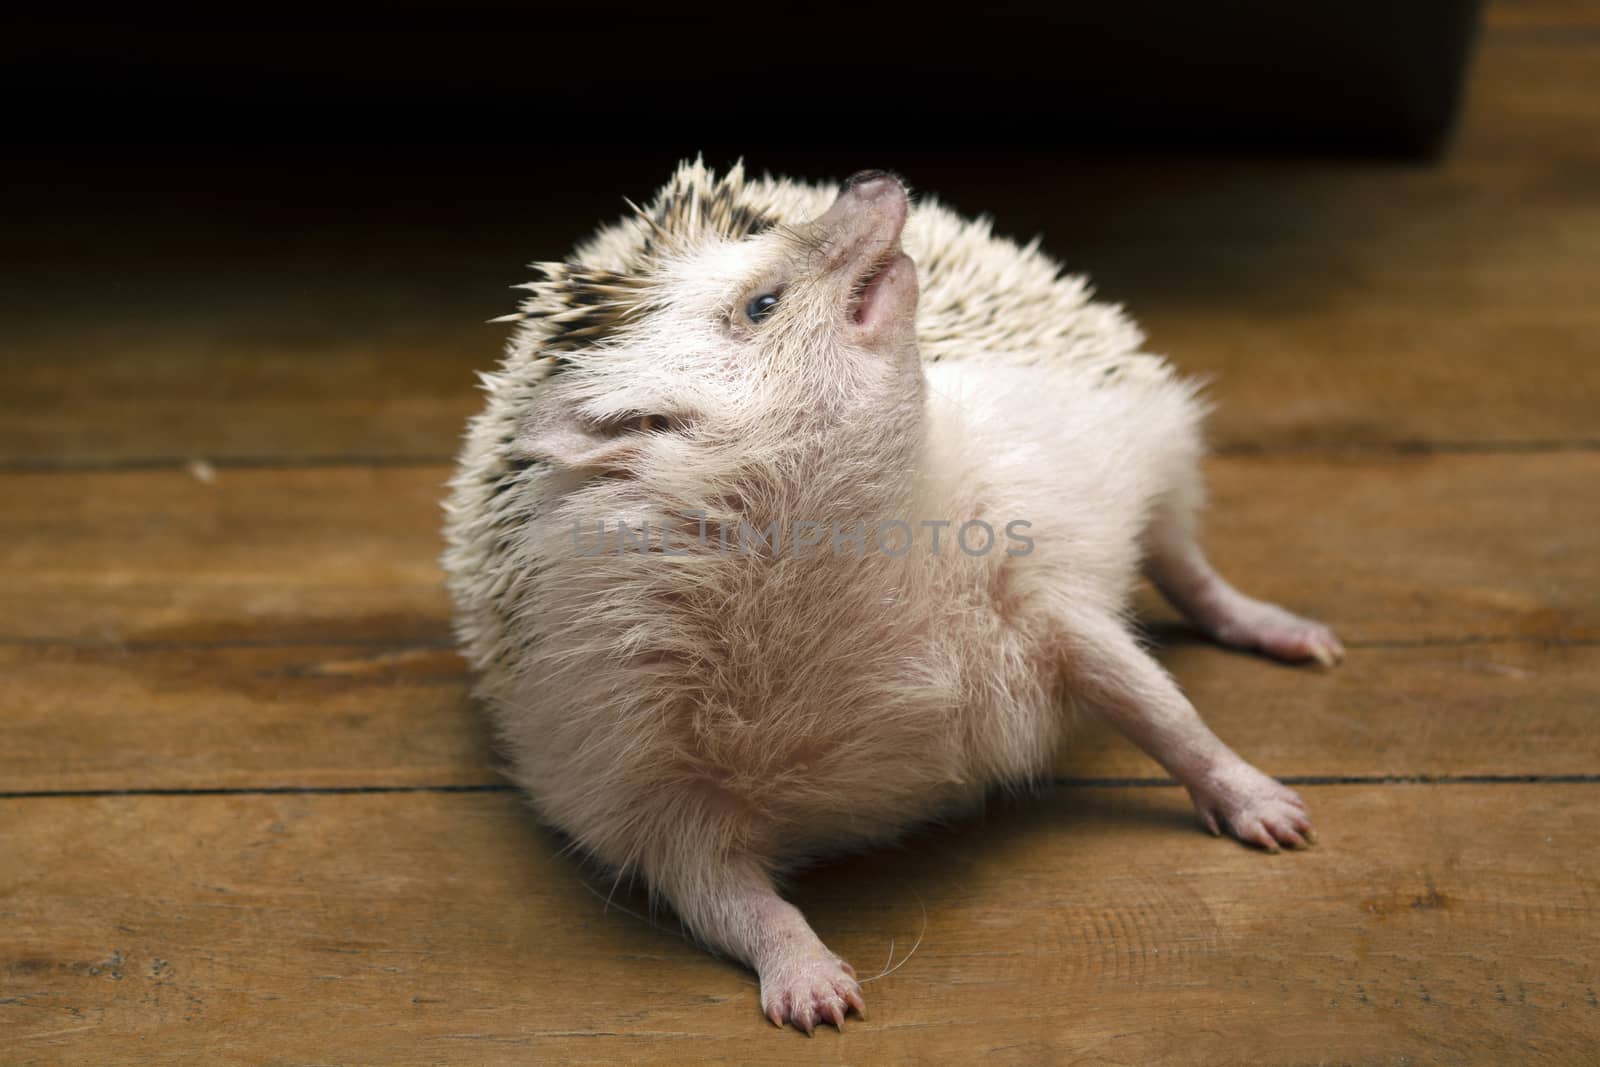 Little hedgehog lay down on floor and turn the face upwards.